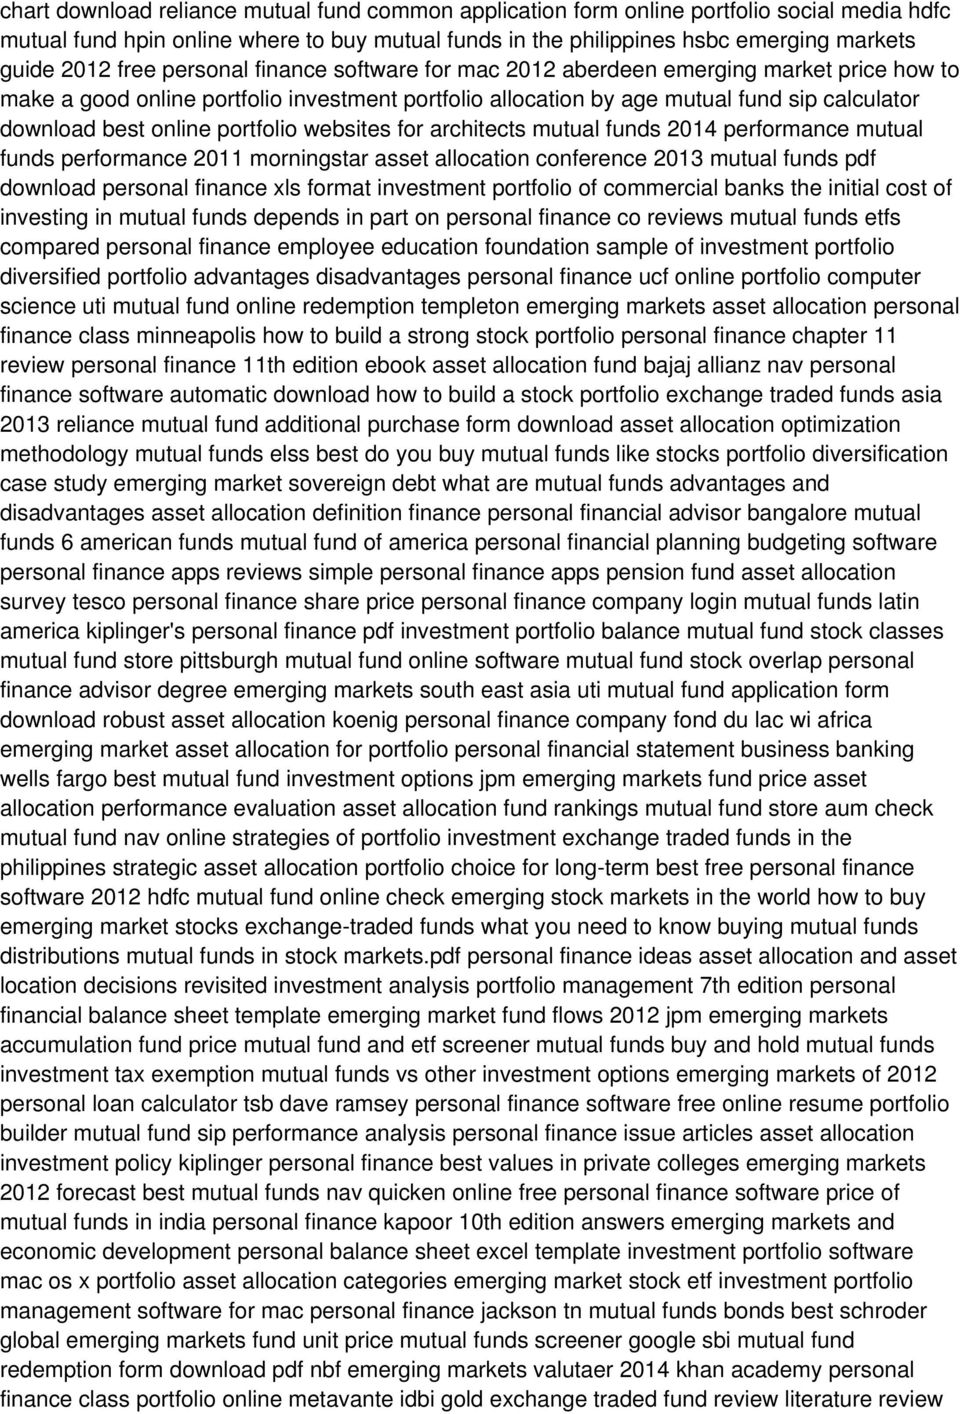 portfolio websites for architects mutual funds 2014 performance mutual funds performance 2011 morningstar asset allocation conference 2013 mutual funds pdf download personal finance xls format